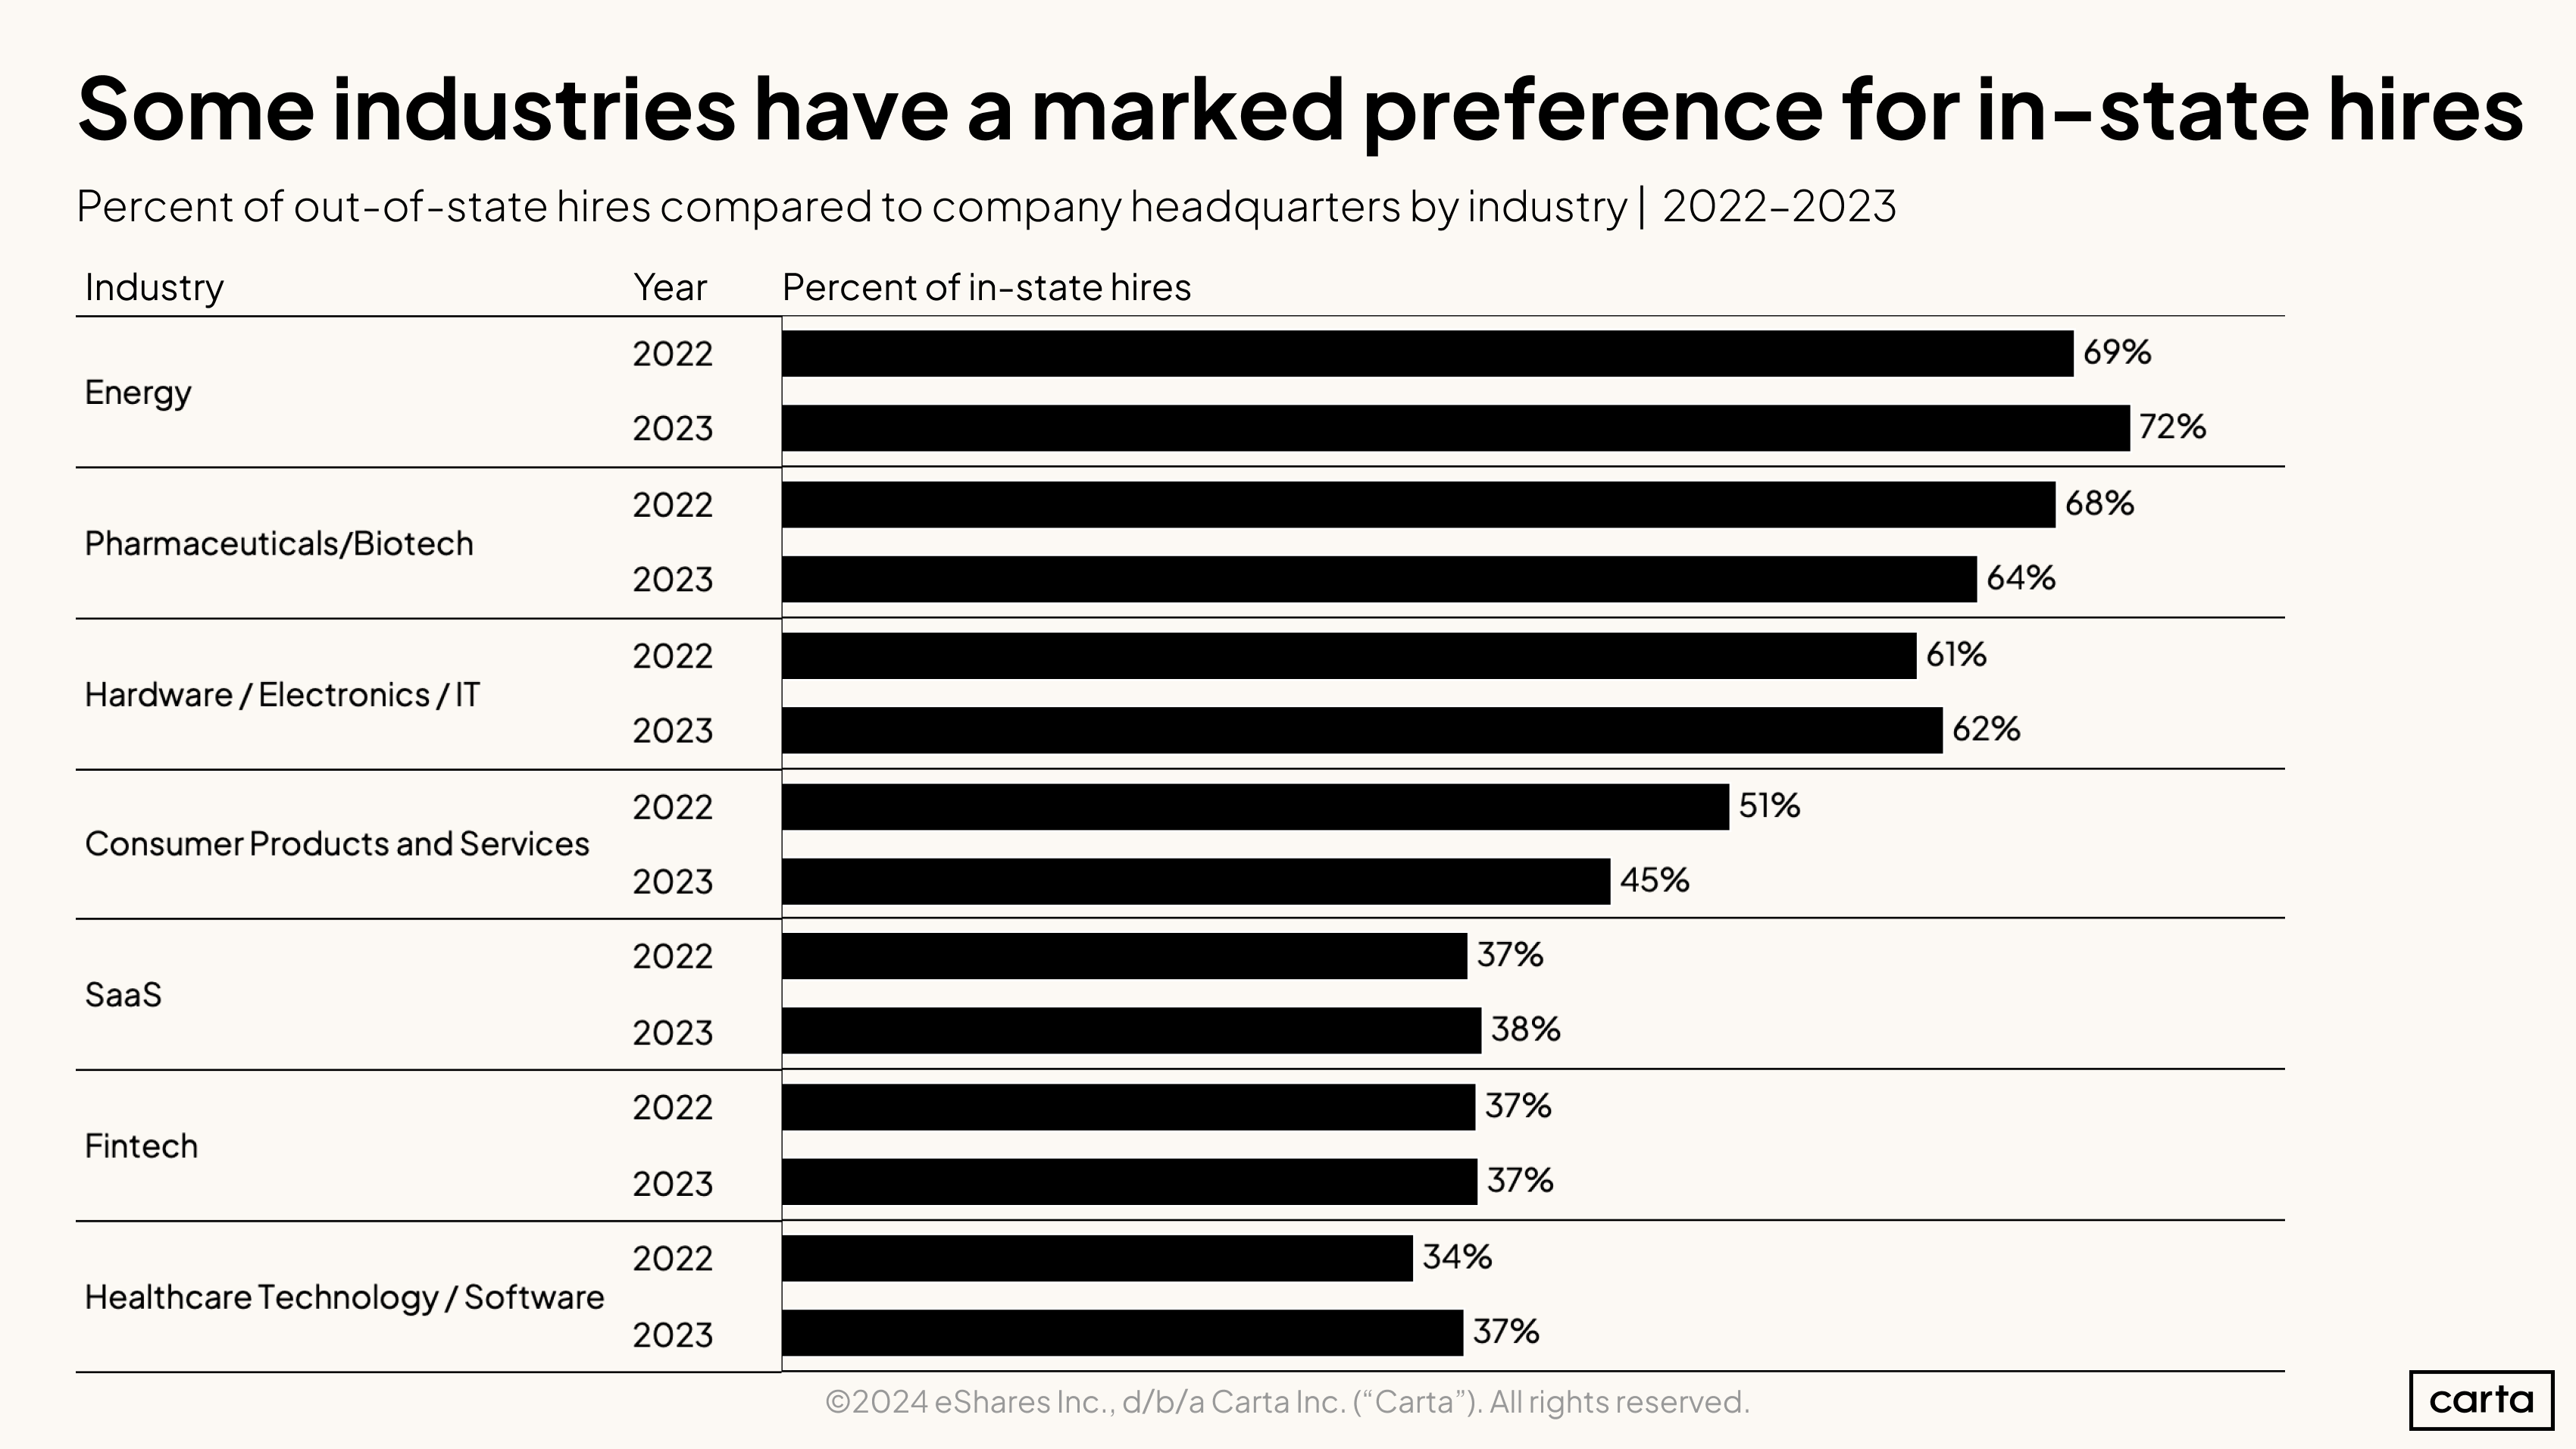 Some industries have a marked preference for in-state hires